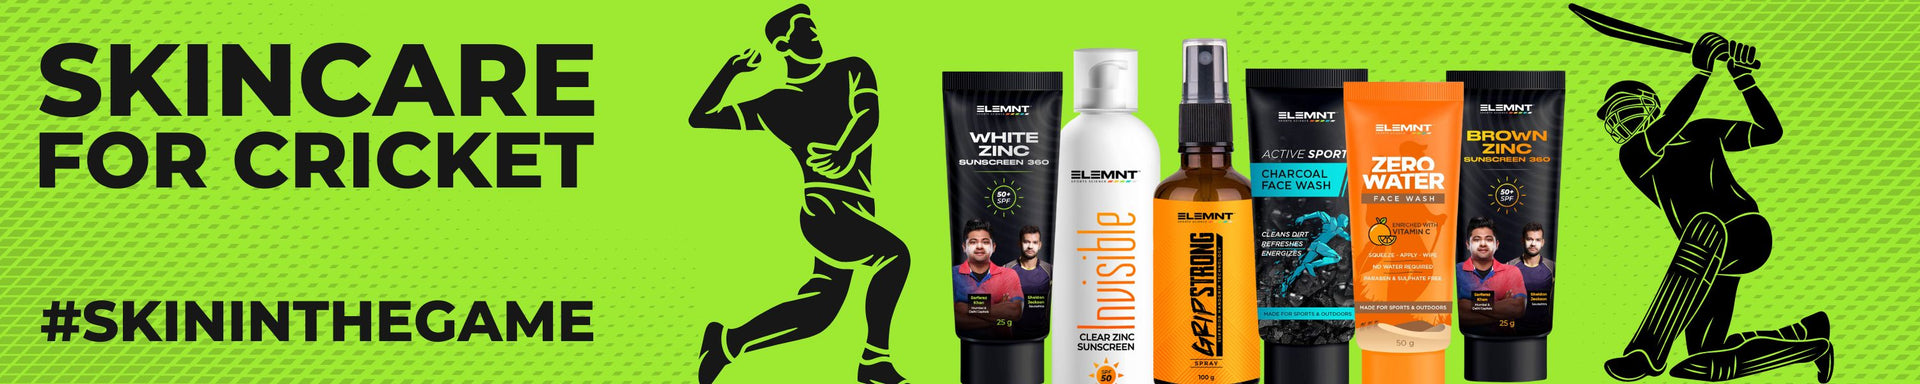 skincare products for cricketers